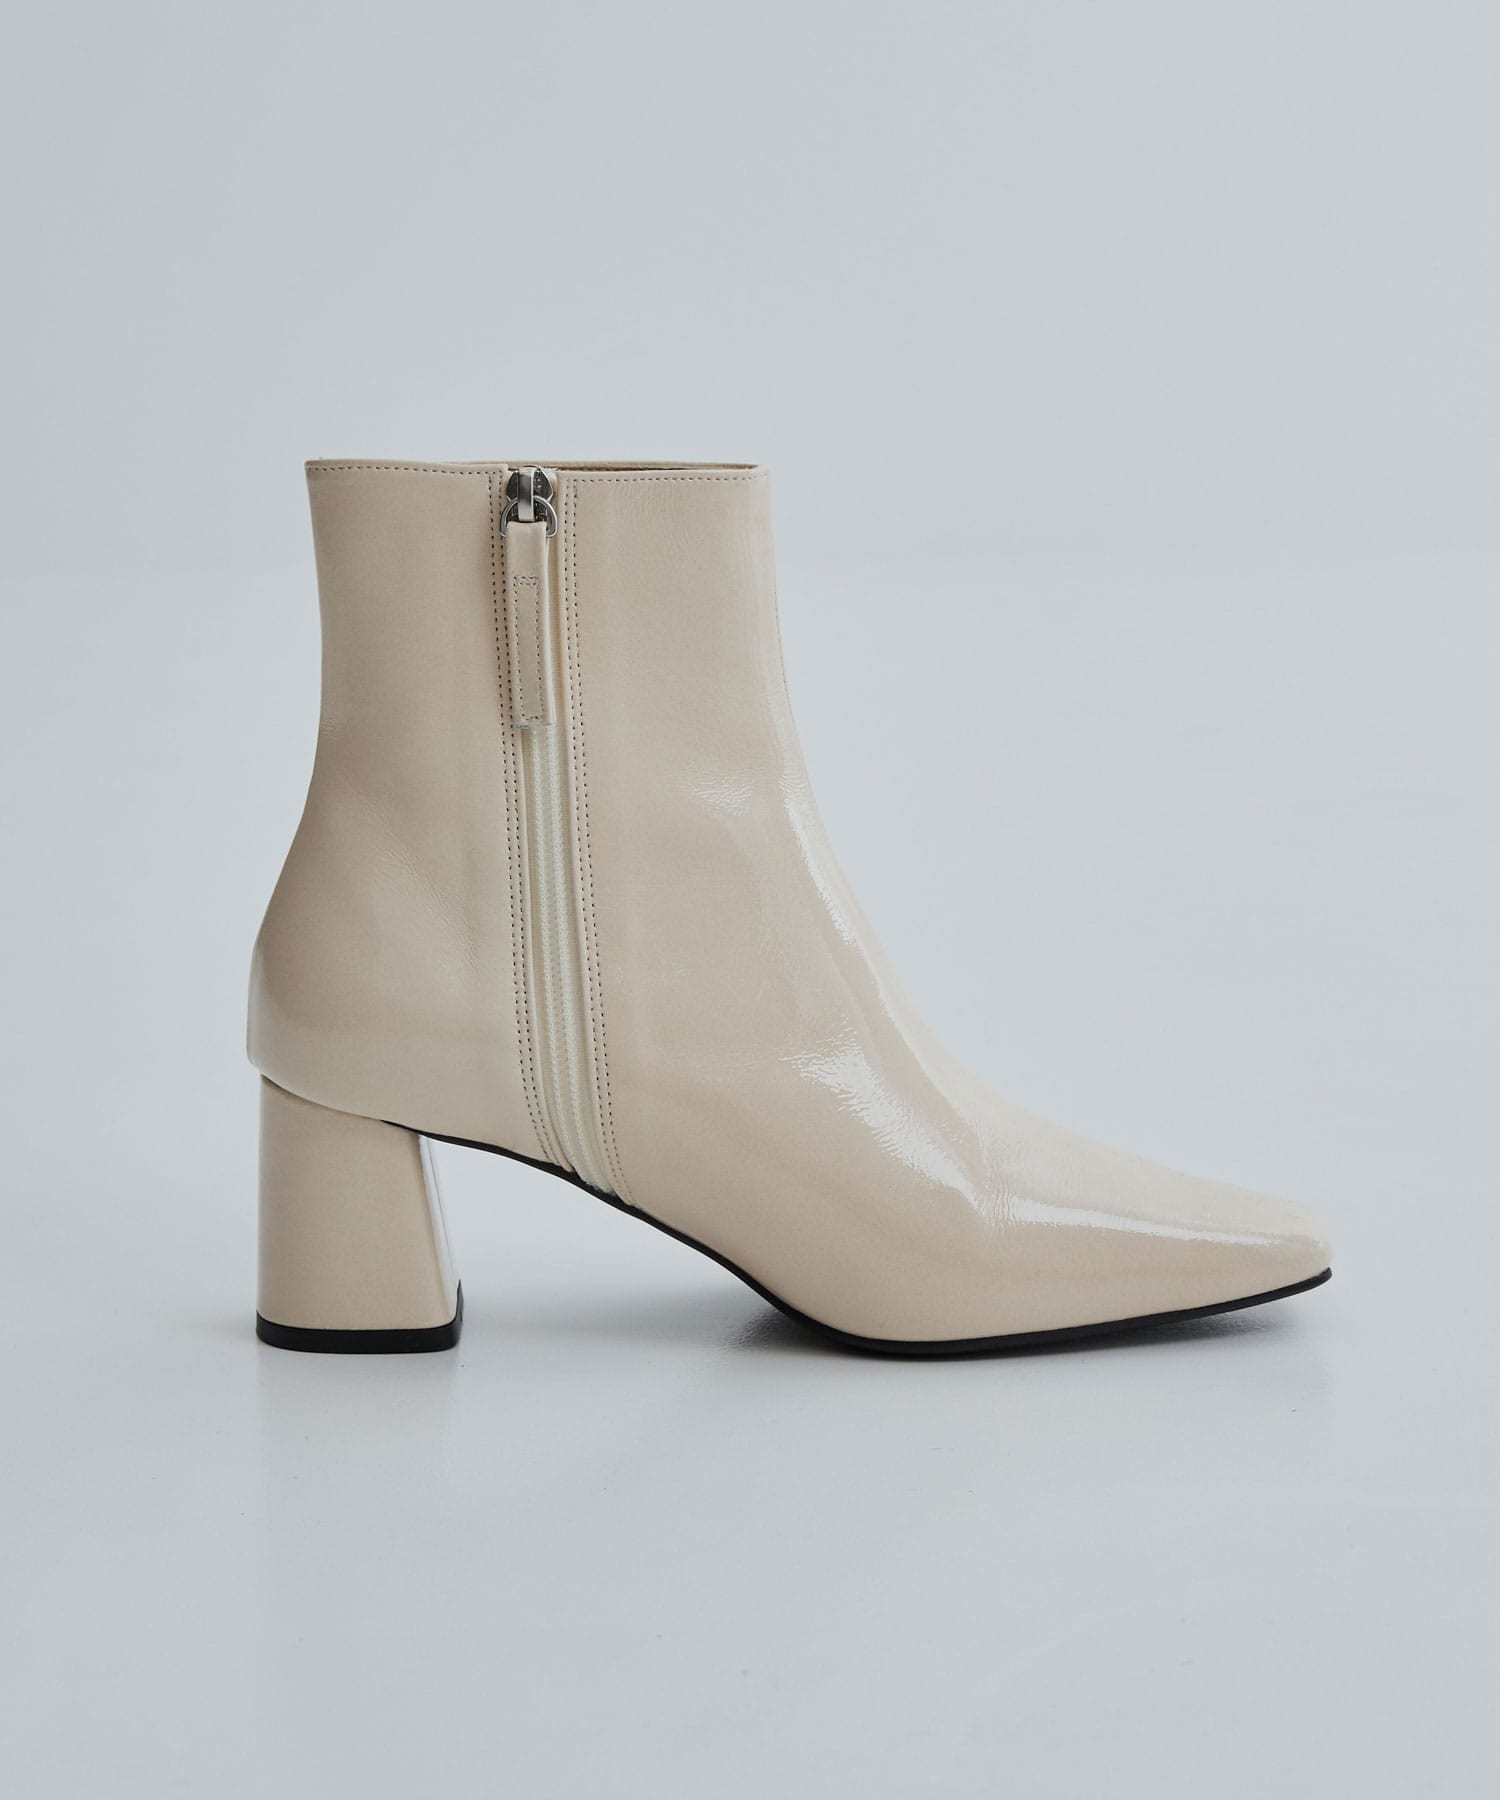 Patent leather square toe boots THE PERMANENT EYE